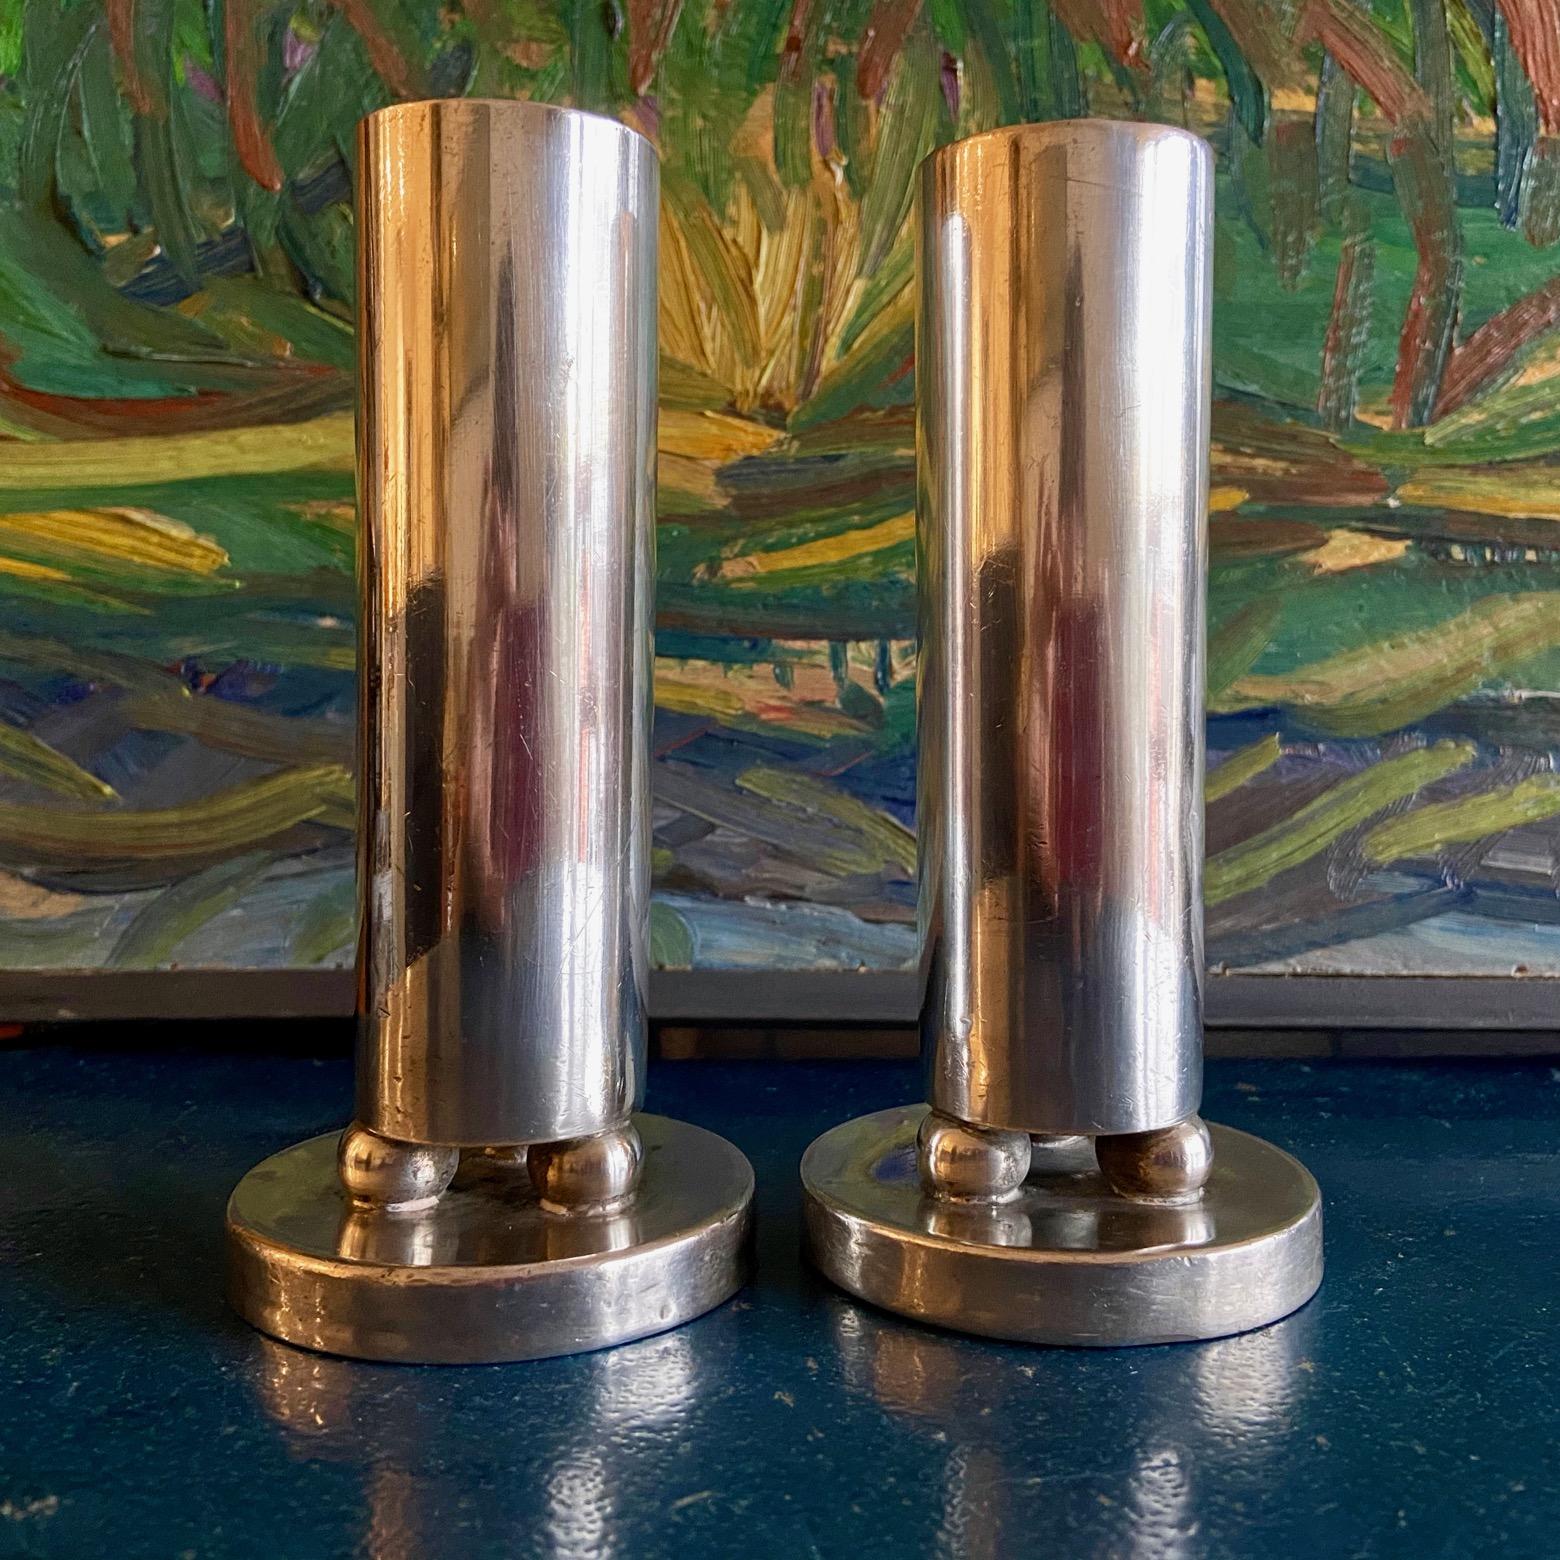 An unusual pair of silver plated soliflore vases / candle holders on of unusual geometric design, by Arthur Krupp, Milano, and most probably designed by Gio Ponti. 
They could possibly be used as candleholders for large candles.
Provenance The